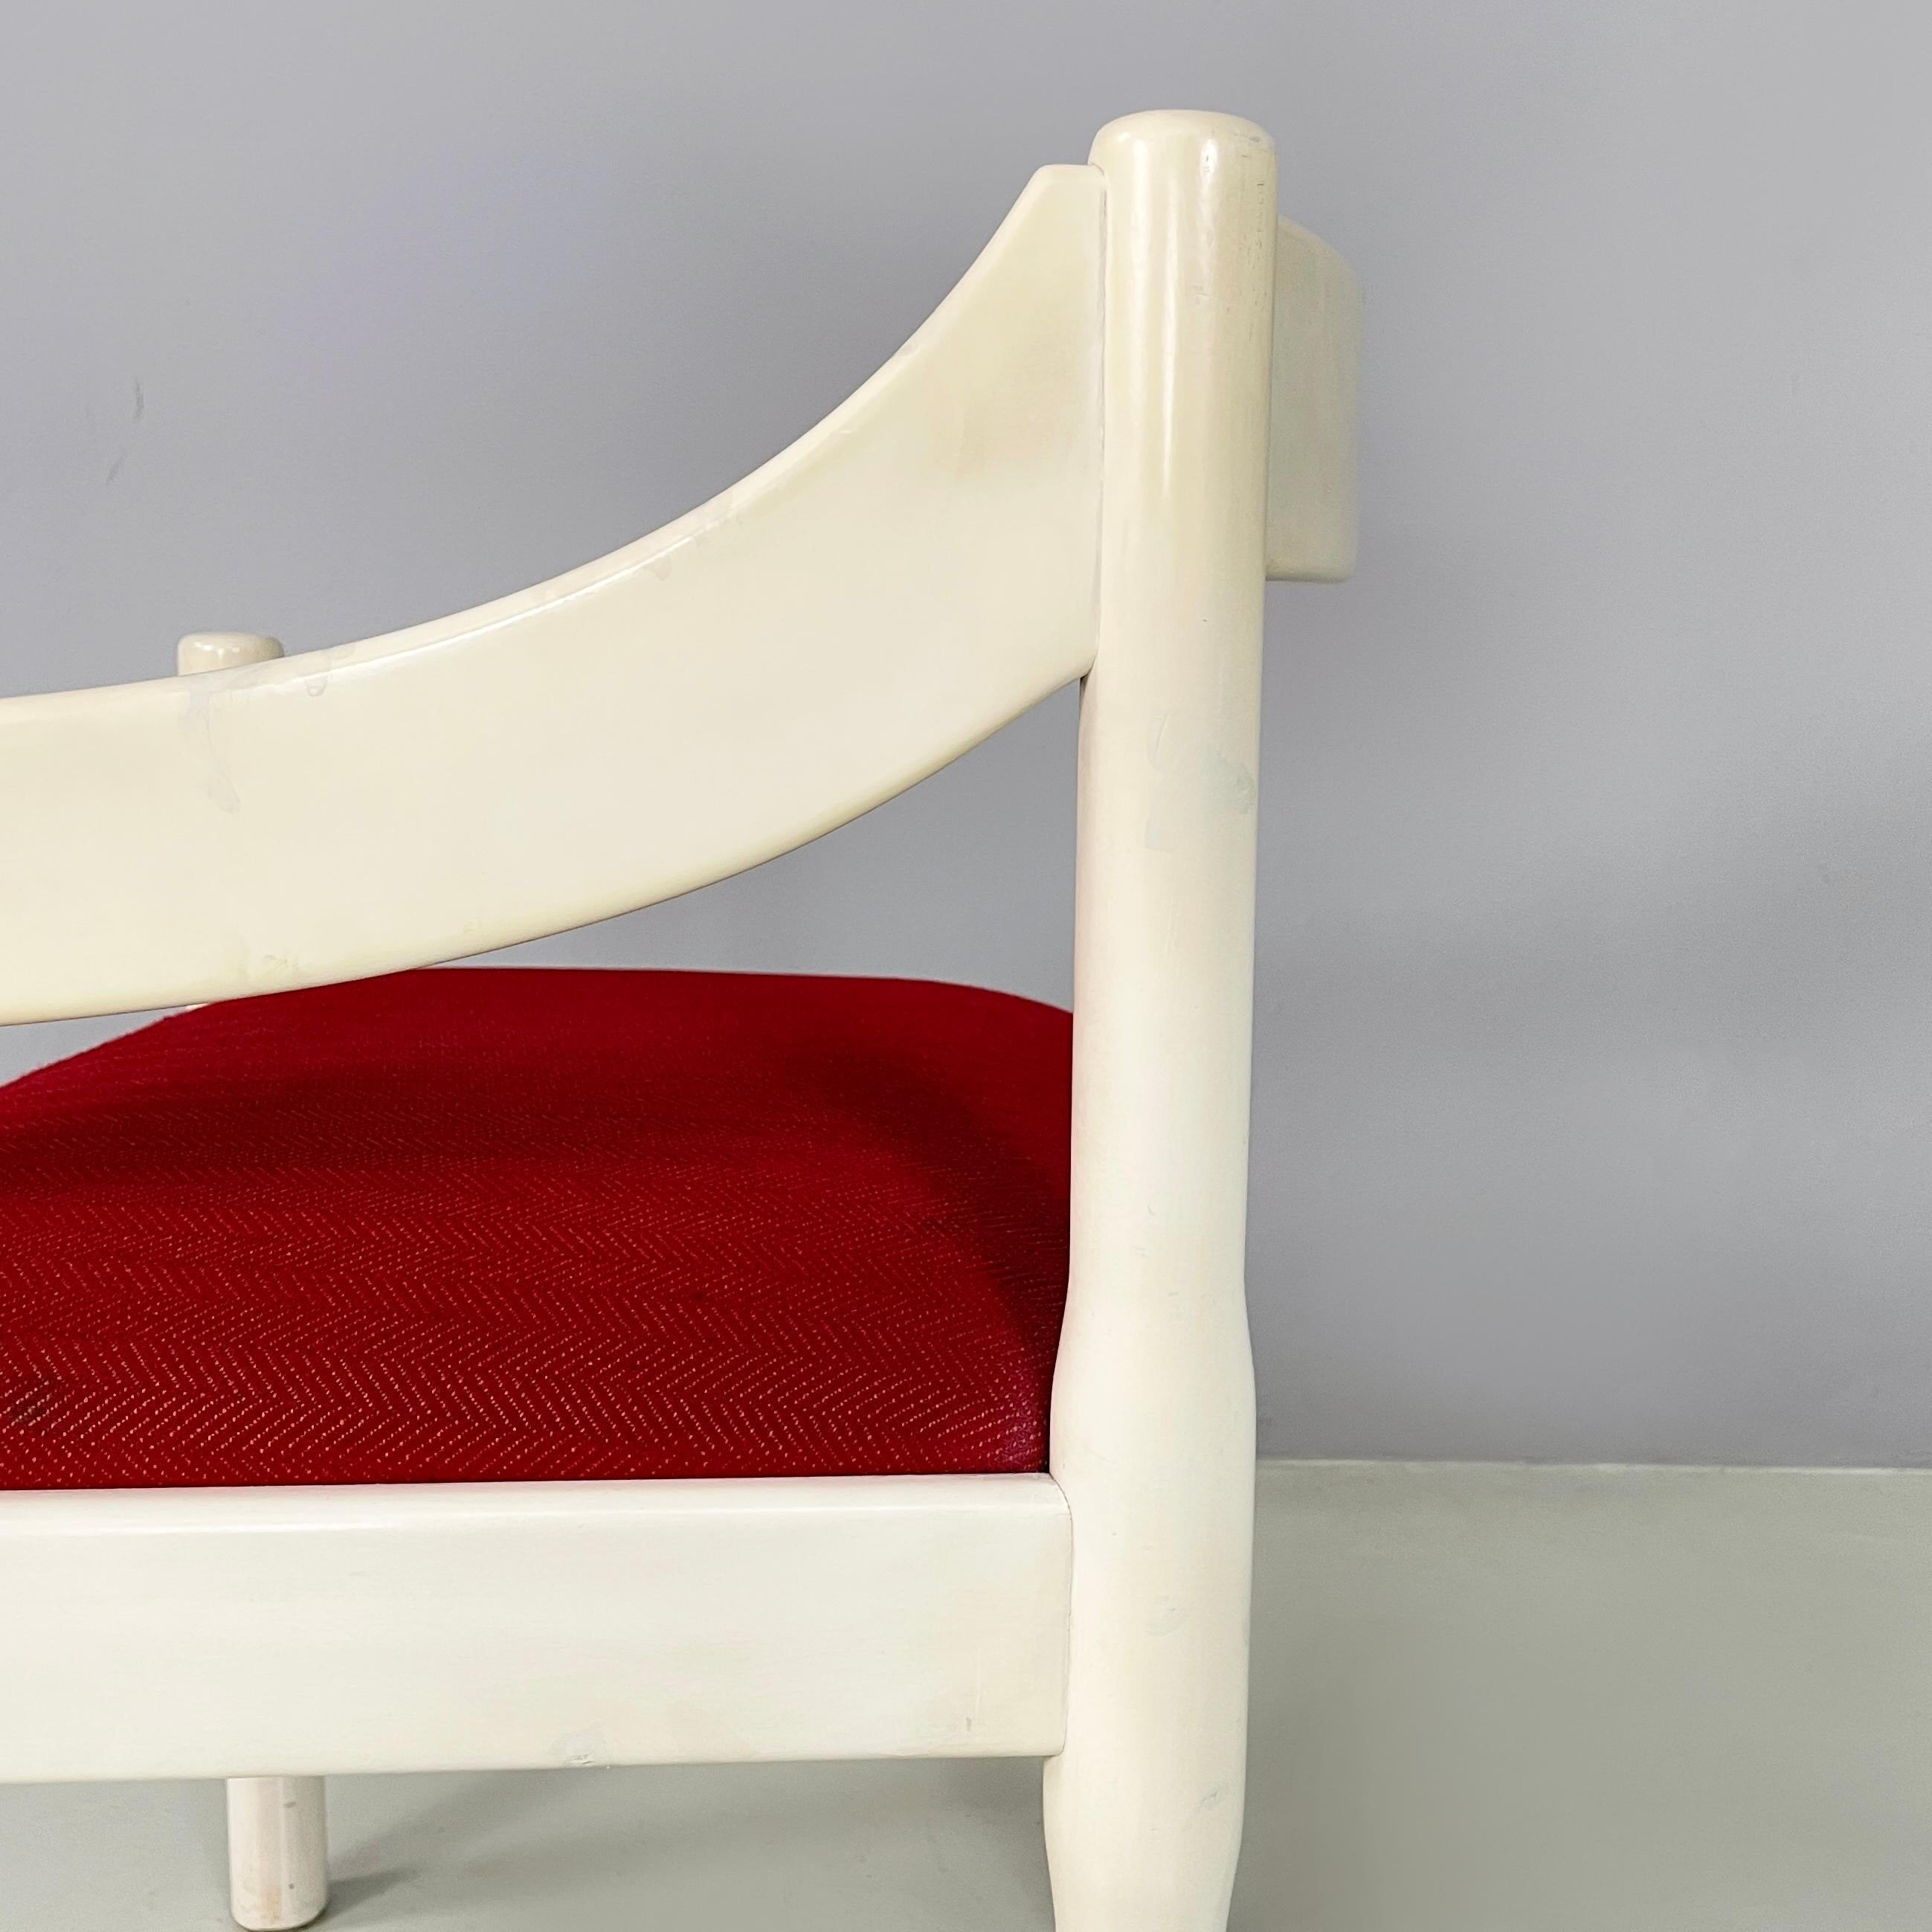 Italian mid-century modern Chair Carimate by Vico Magistretti for Cassina, 1970s For Sale 7